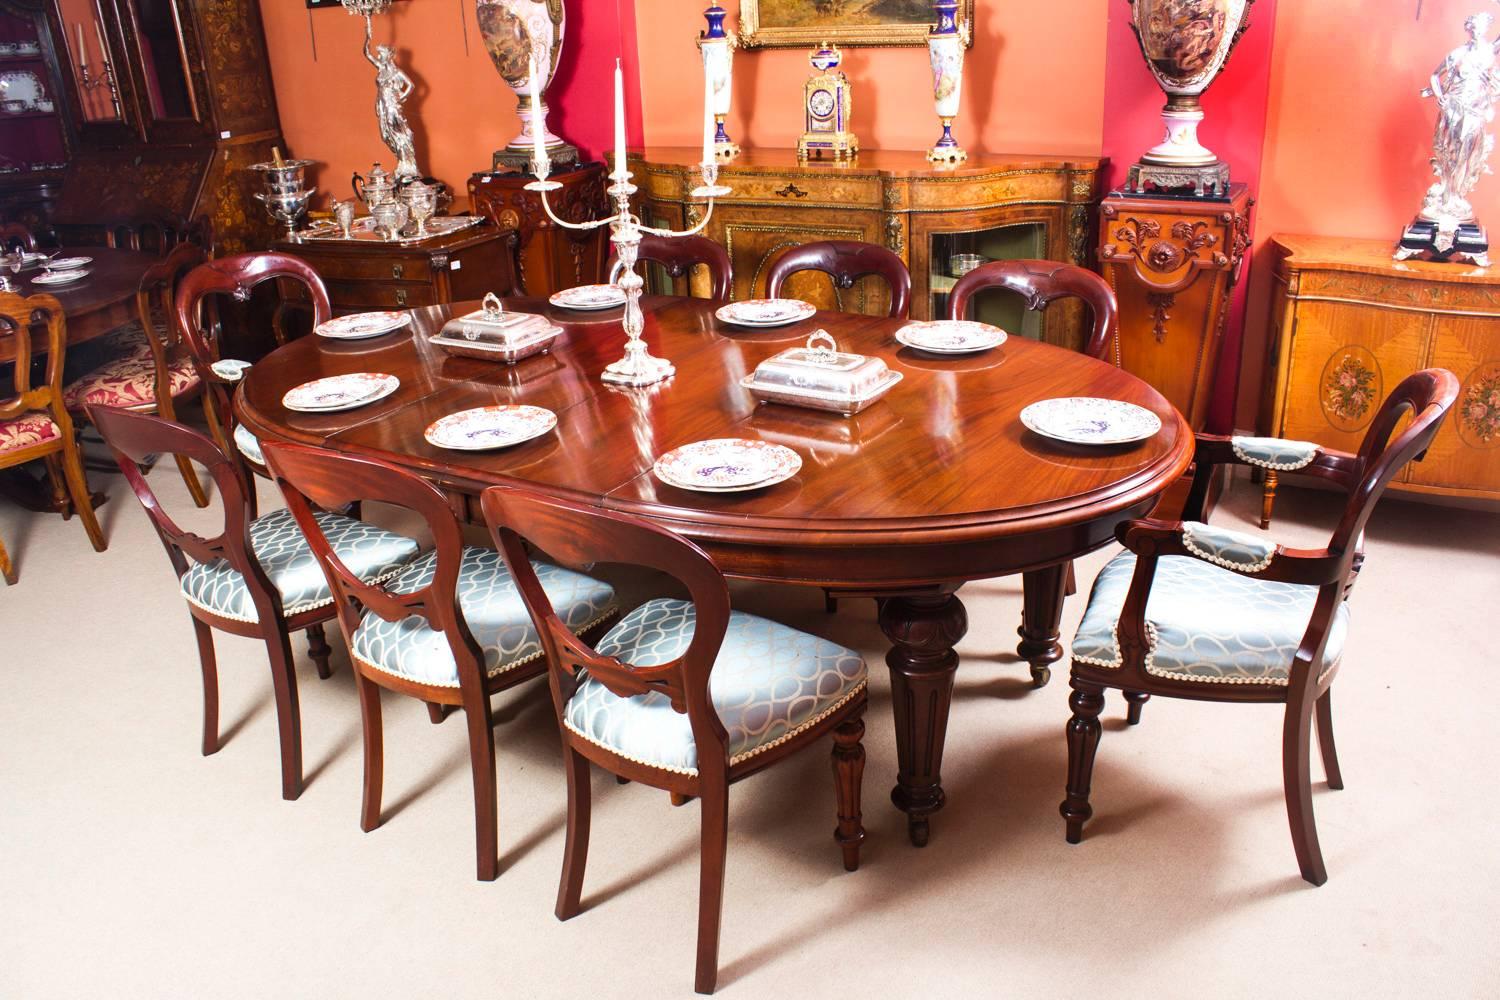 This is a fabulous dining set comprising an antique Victorian mahogany oval extending dining table, circa 1860 in date with a set of eight Victorian style balloon back dining chairs.

The table has two original leaves and has been handcrafted from